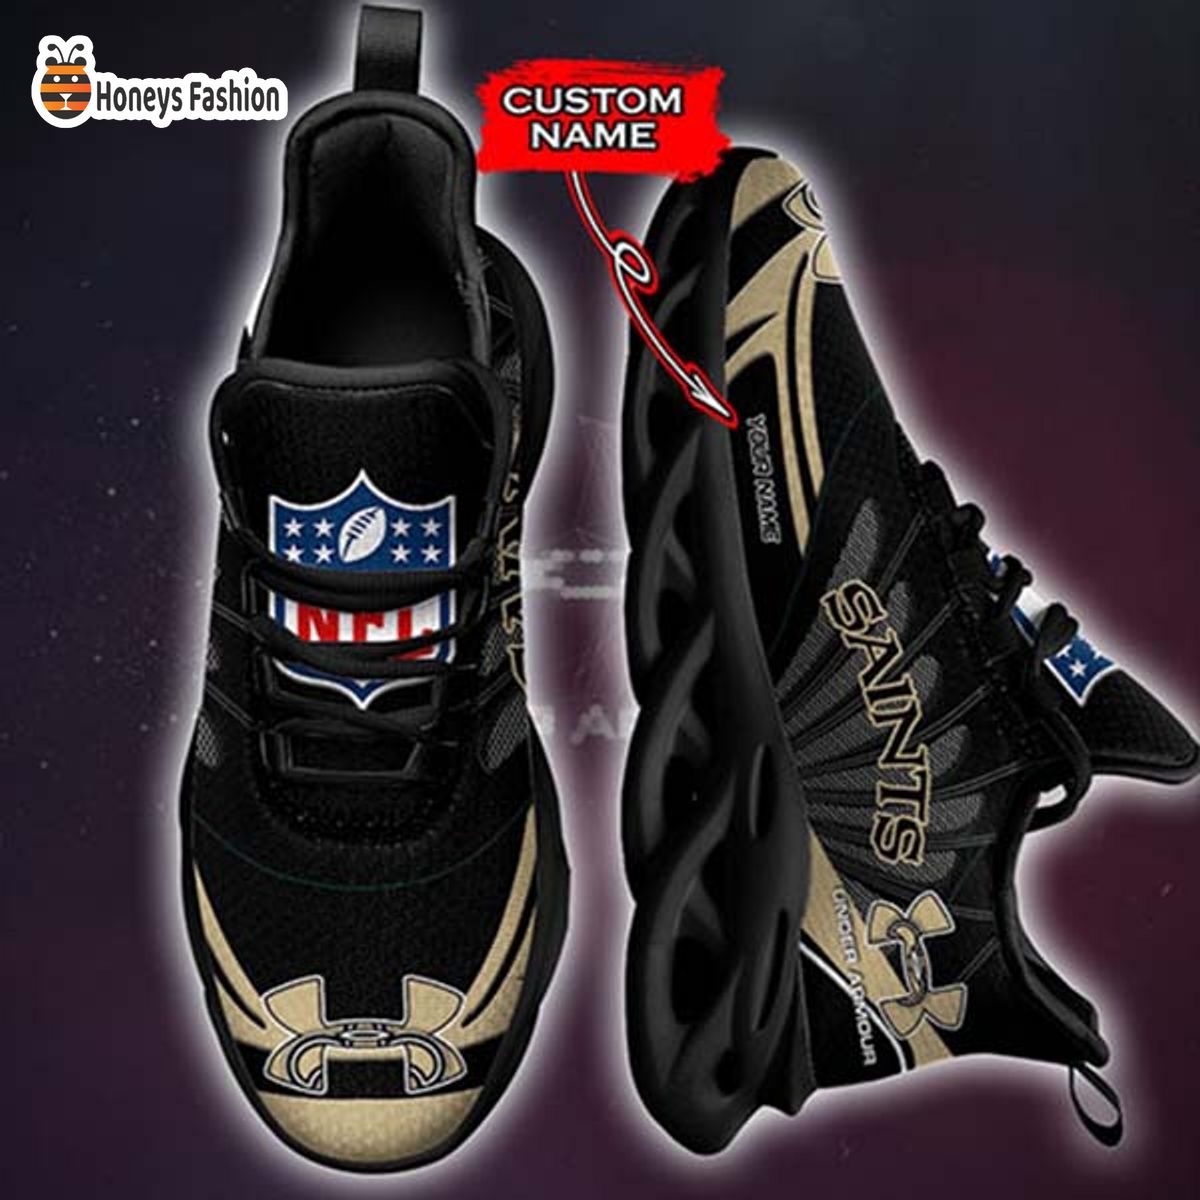 New Orleans Saints Under Armour Custom Name Max Soul Sneaker